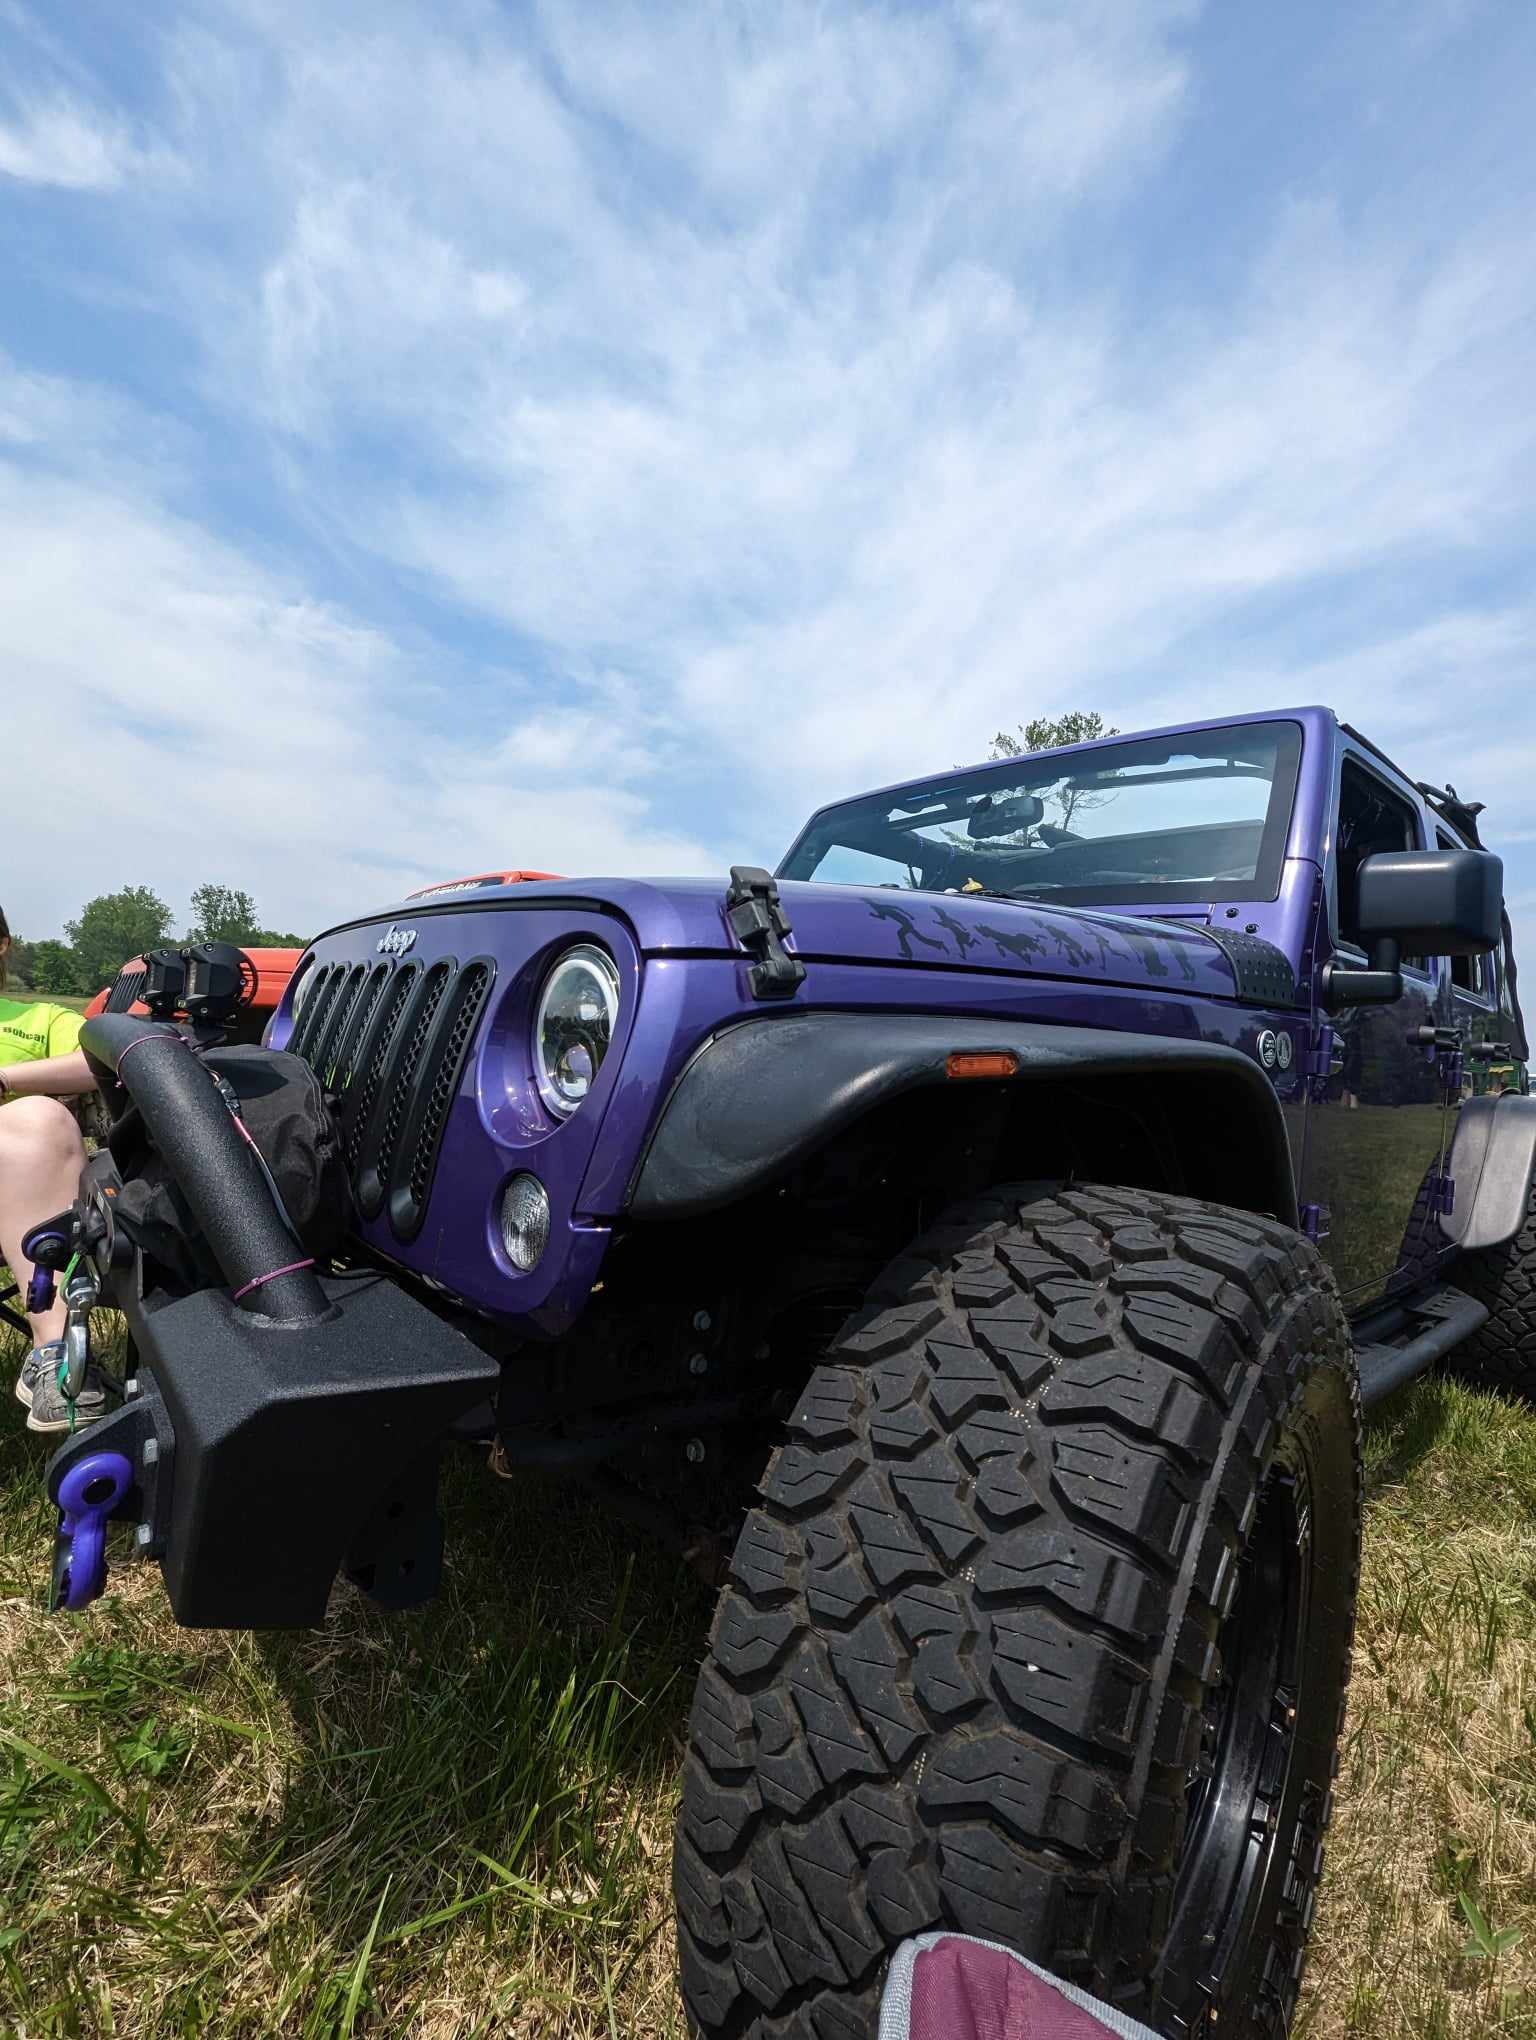 Display your Jeep at the Show and Shine at Midland's airport